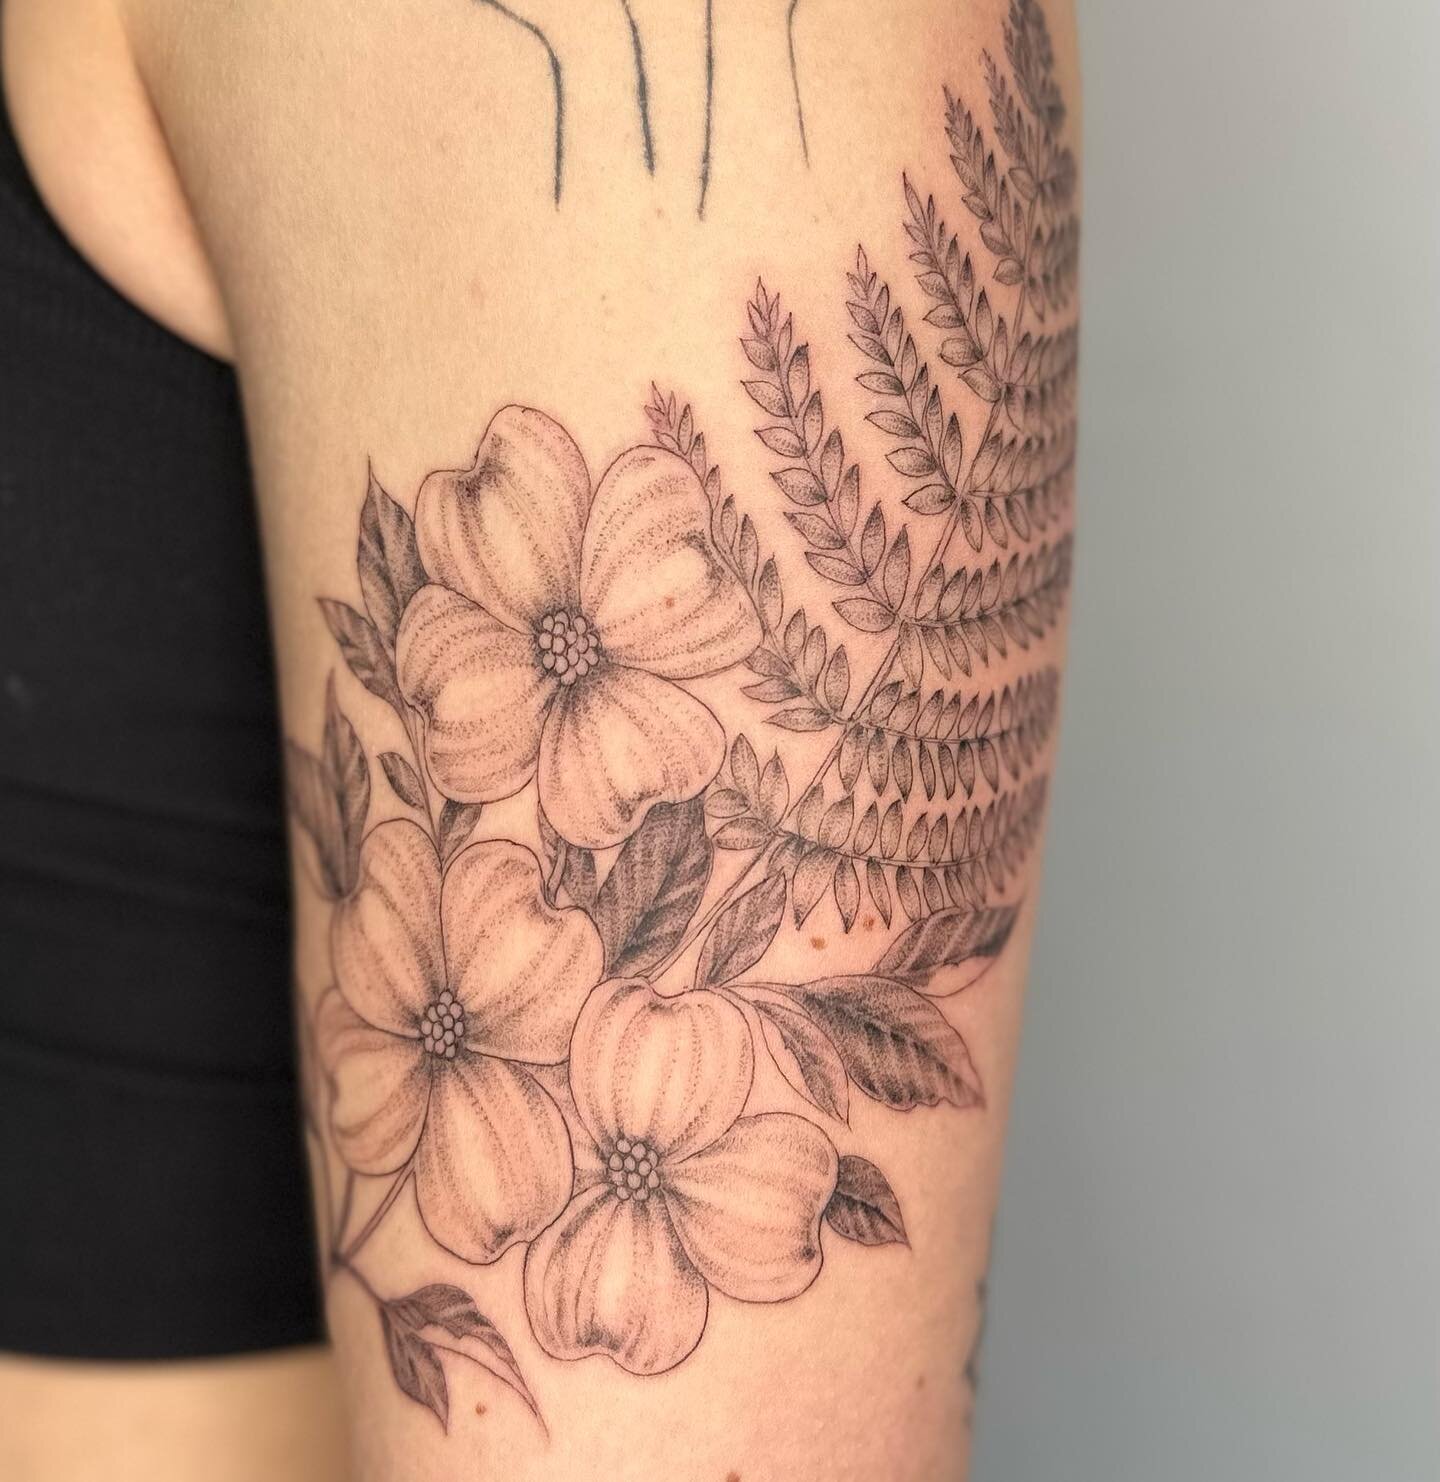 Dogwood flowers and fern tattoo for Lucy. 

jeremygoldentattoo.com for booking